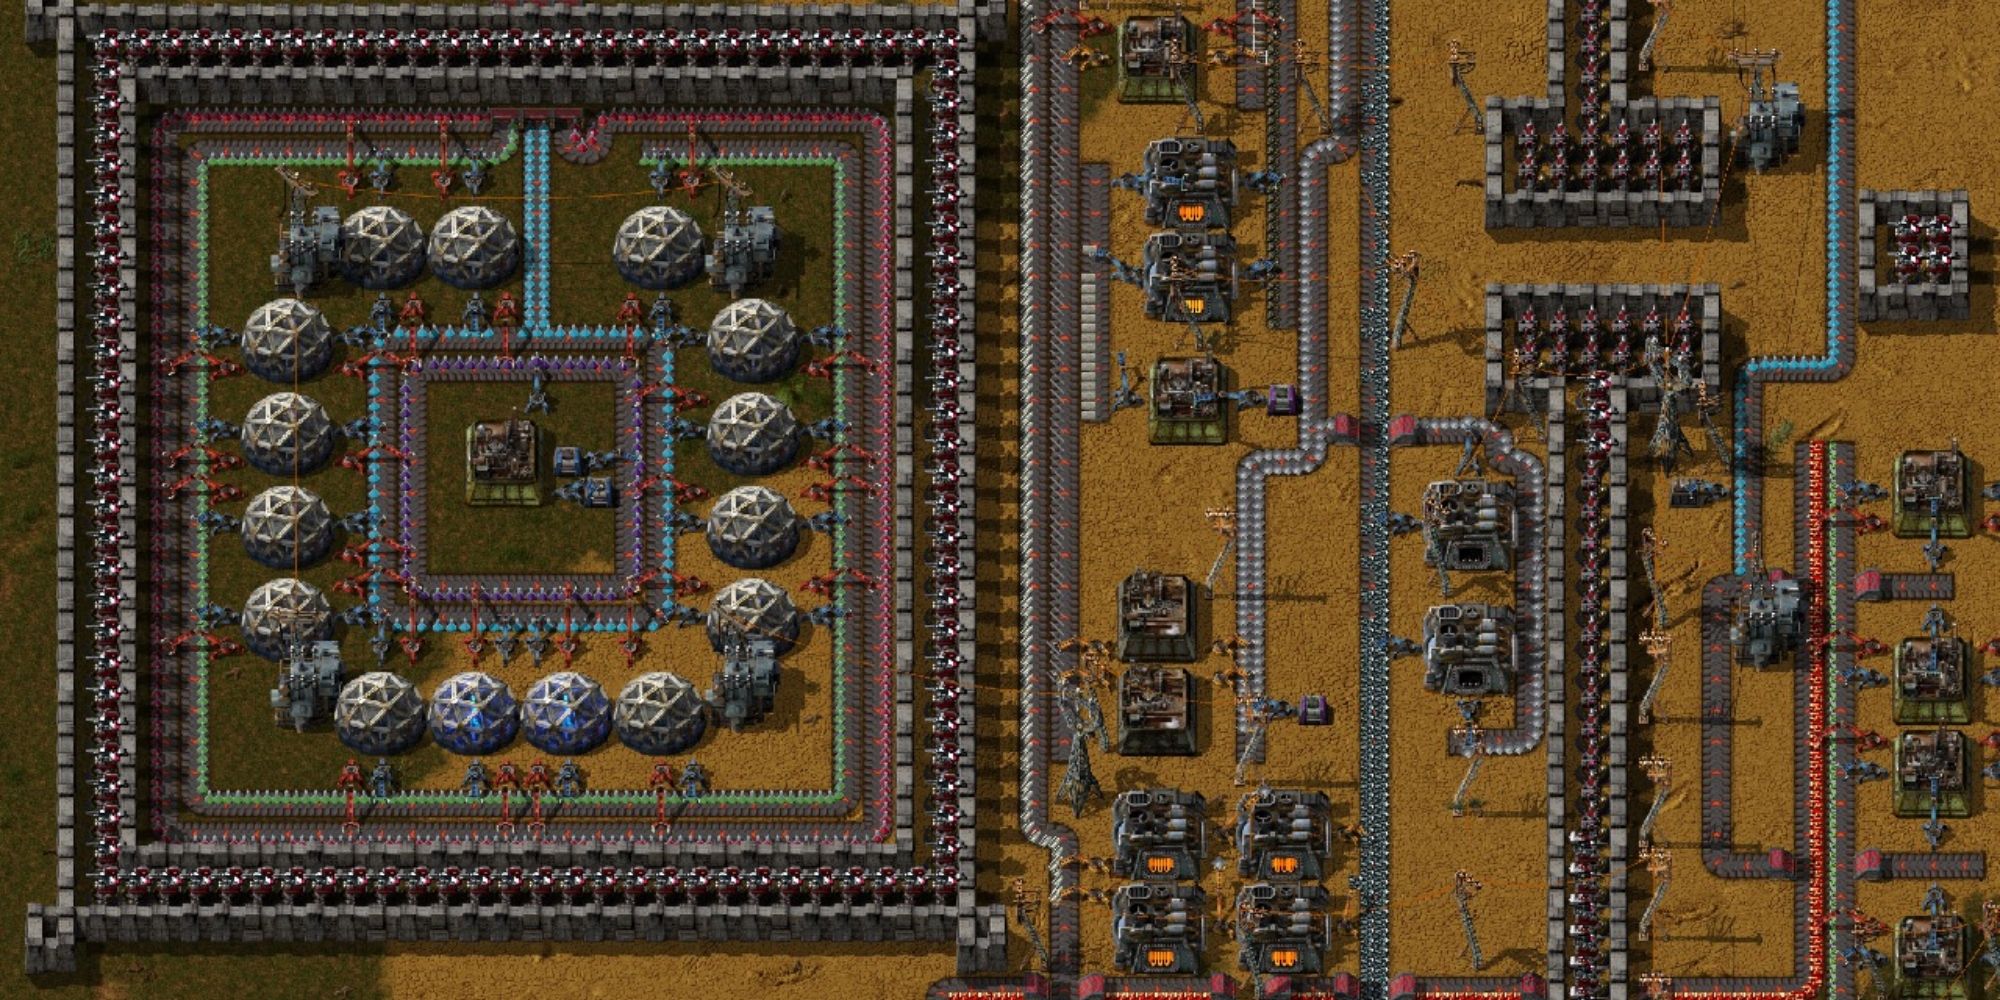 A large factory is being made, with a lot of structures built into a square